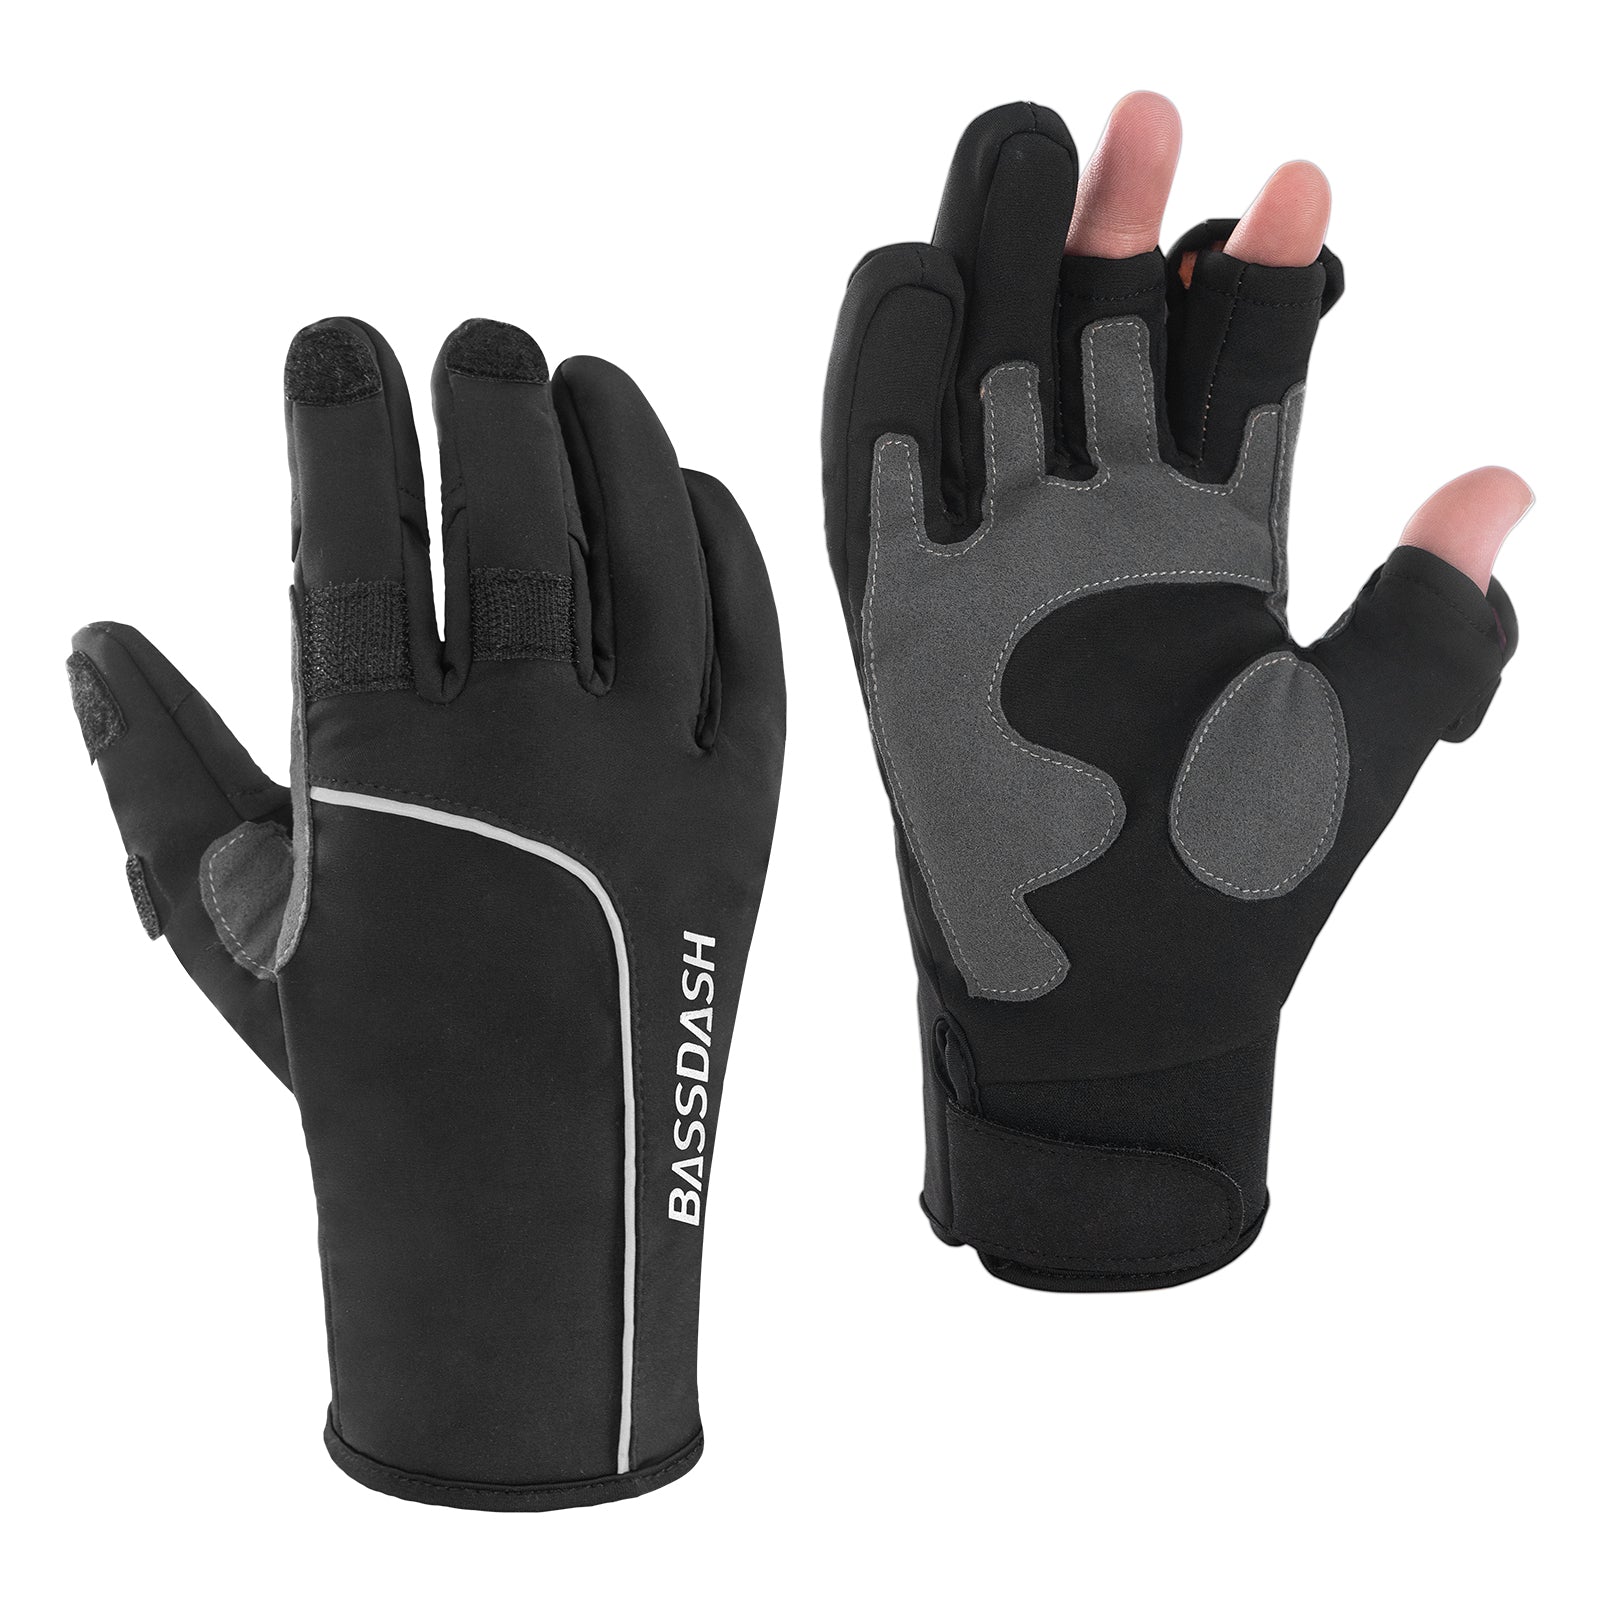 WintePro Water-resistant Fishing Hunting Gloves with Fleece Lining - Black  / S